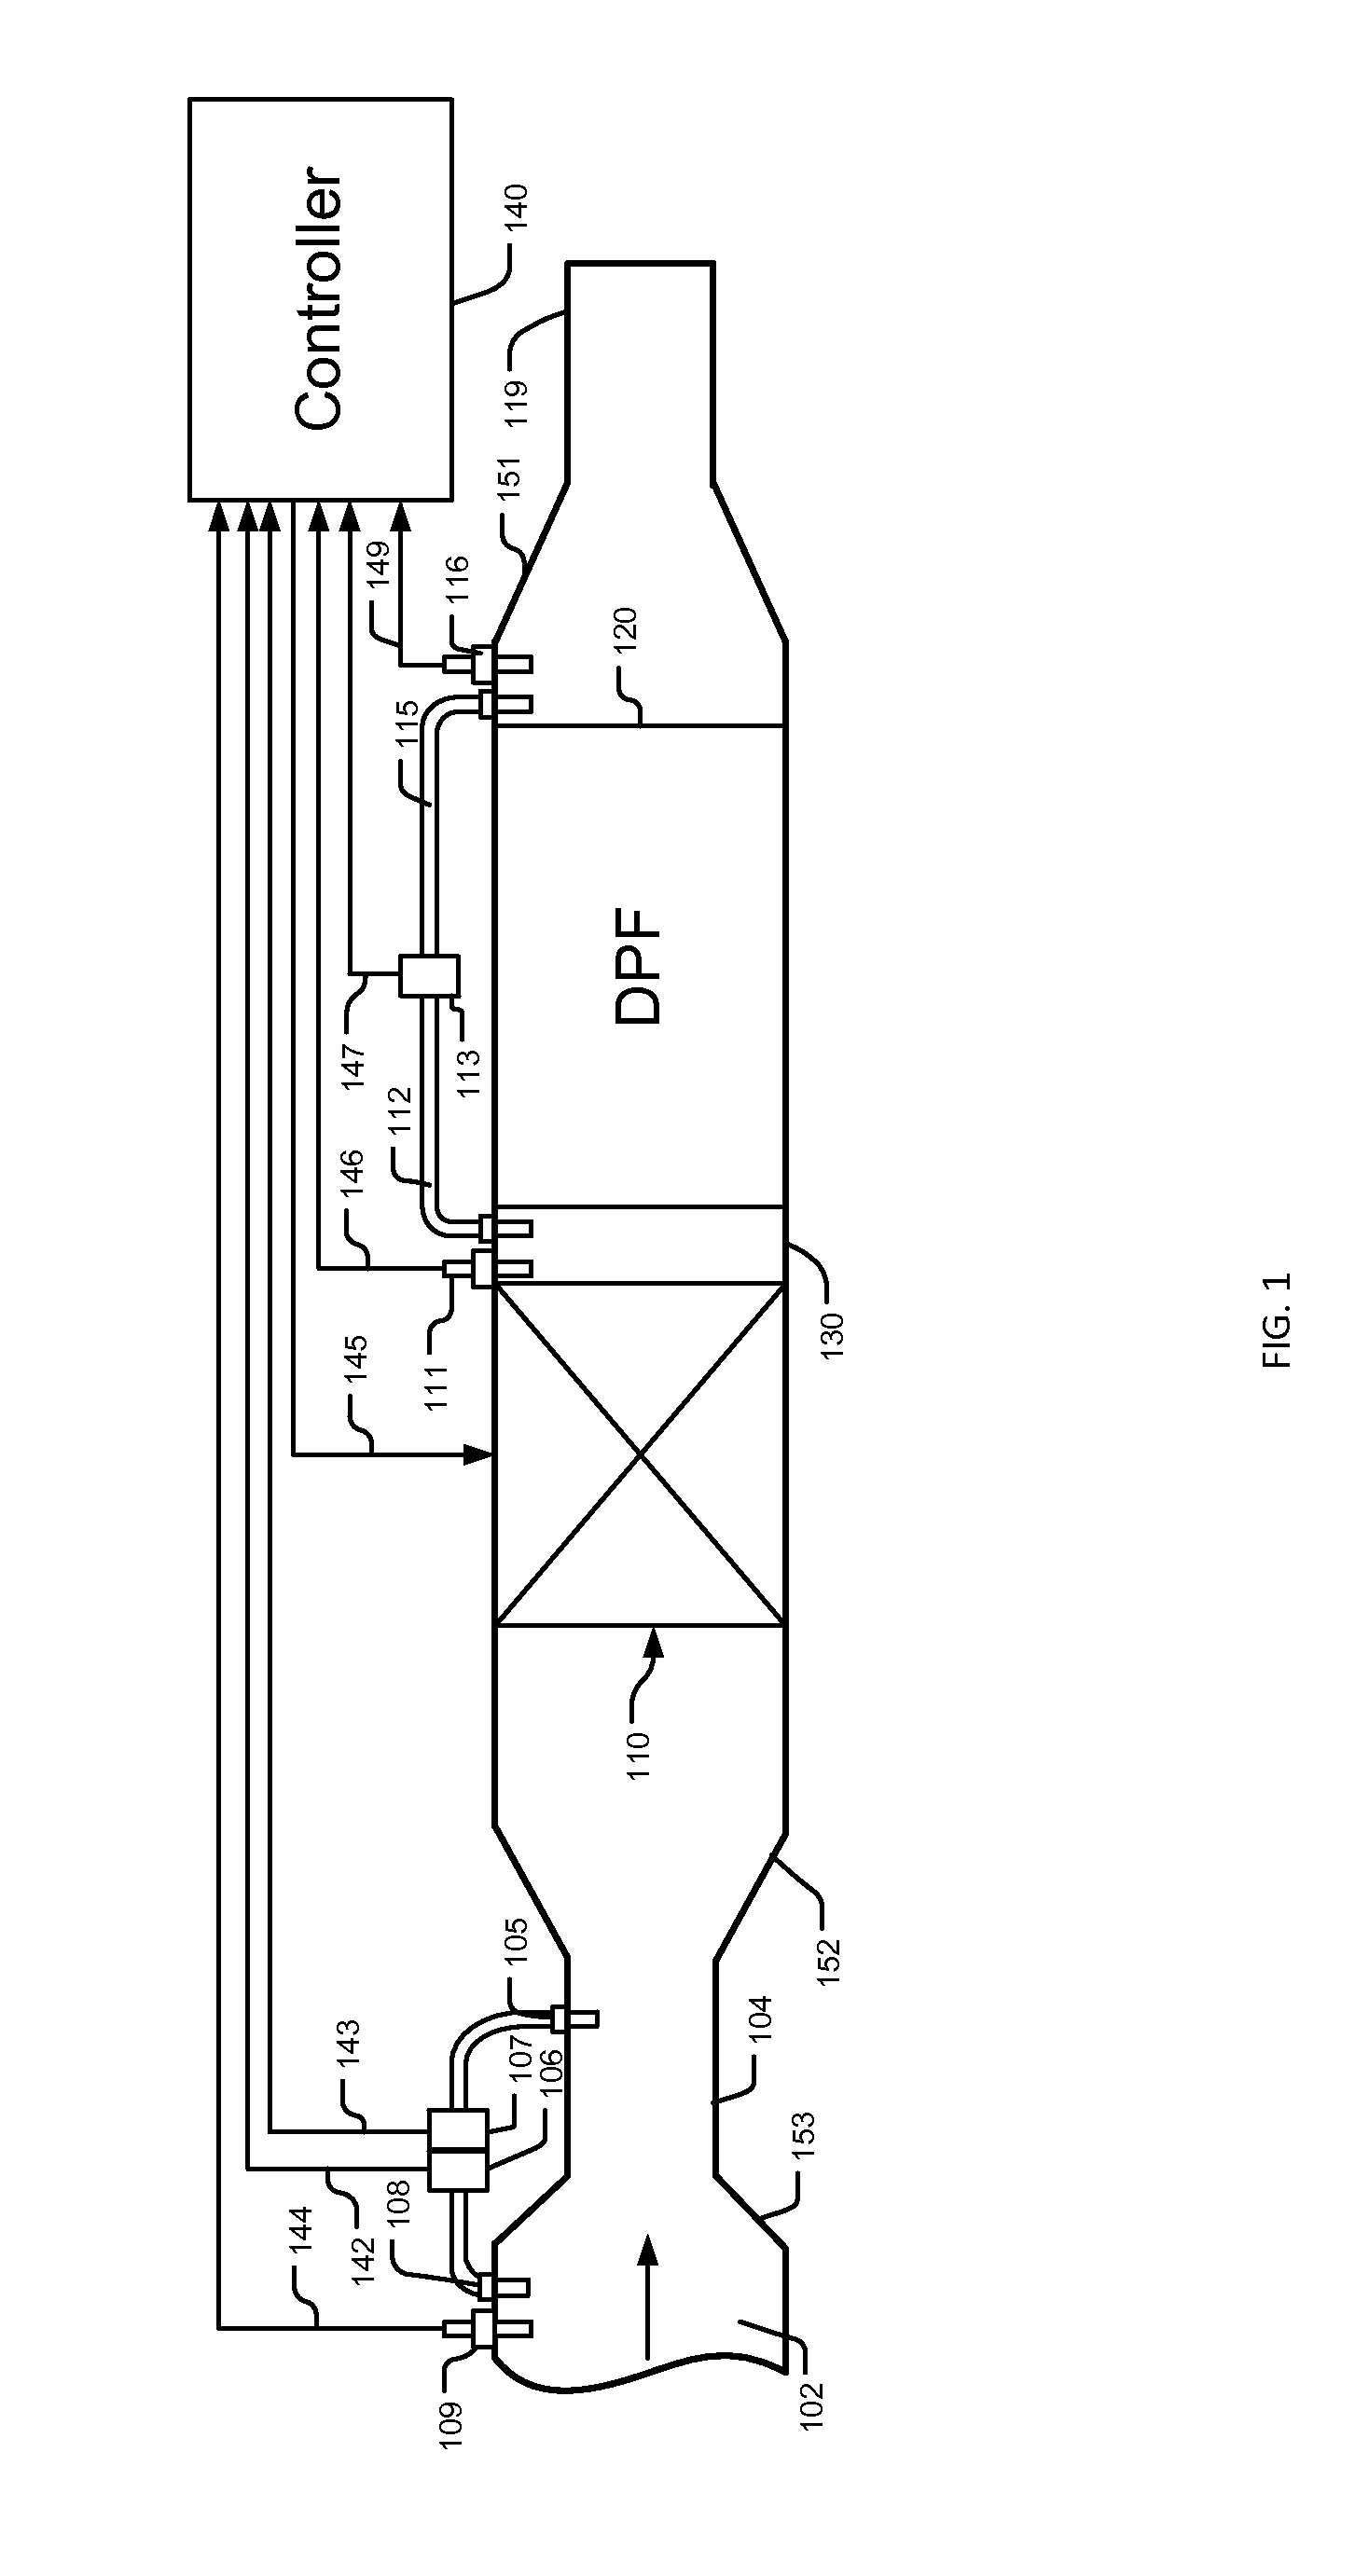 Dpf system with venturi exhaust passage devices